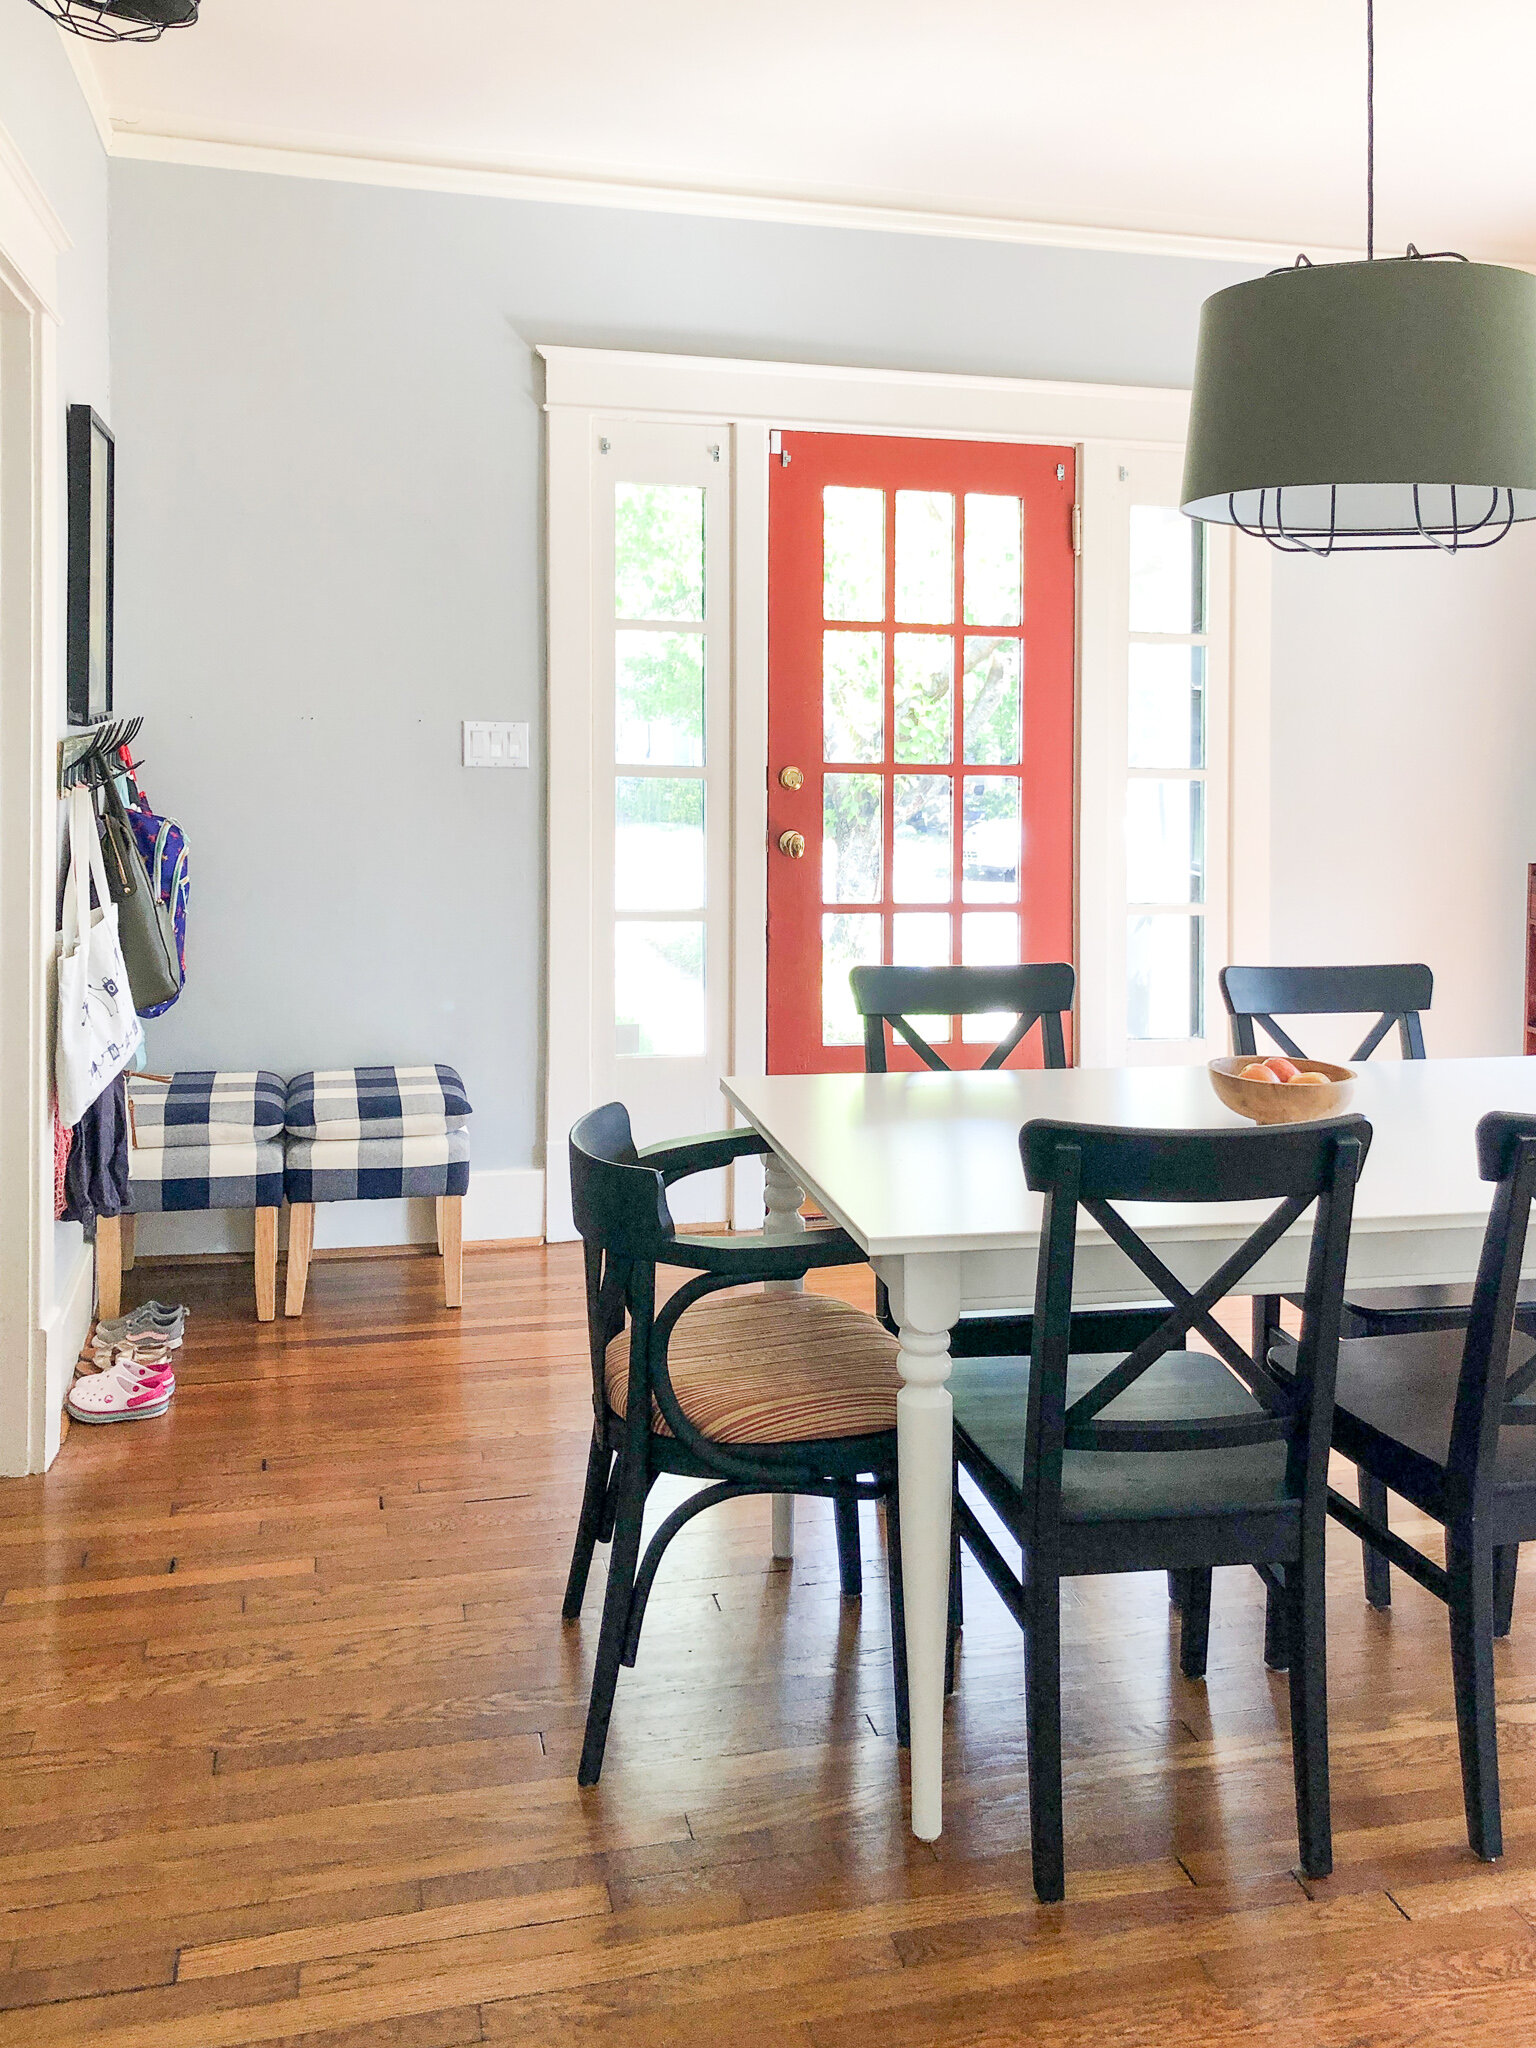 California Bungalow: Our dining room updates in our family-friendly 1920s home.  #SMMakeLifeBeautiful #interior123 #stylemuttspaces #ispymoderndiy #prettyandoverlooked #brightspaceswelove #collectedhome